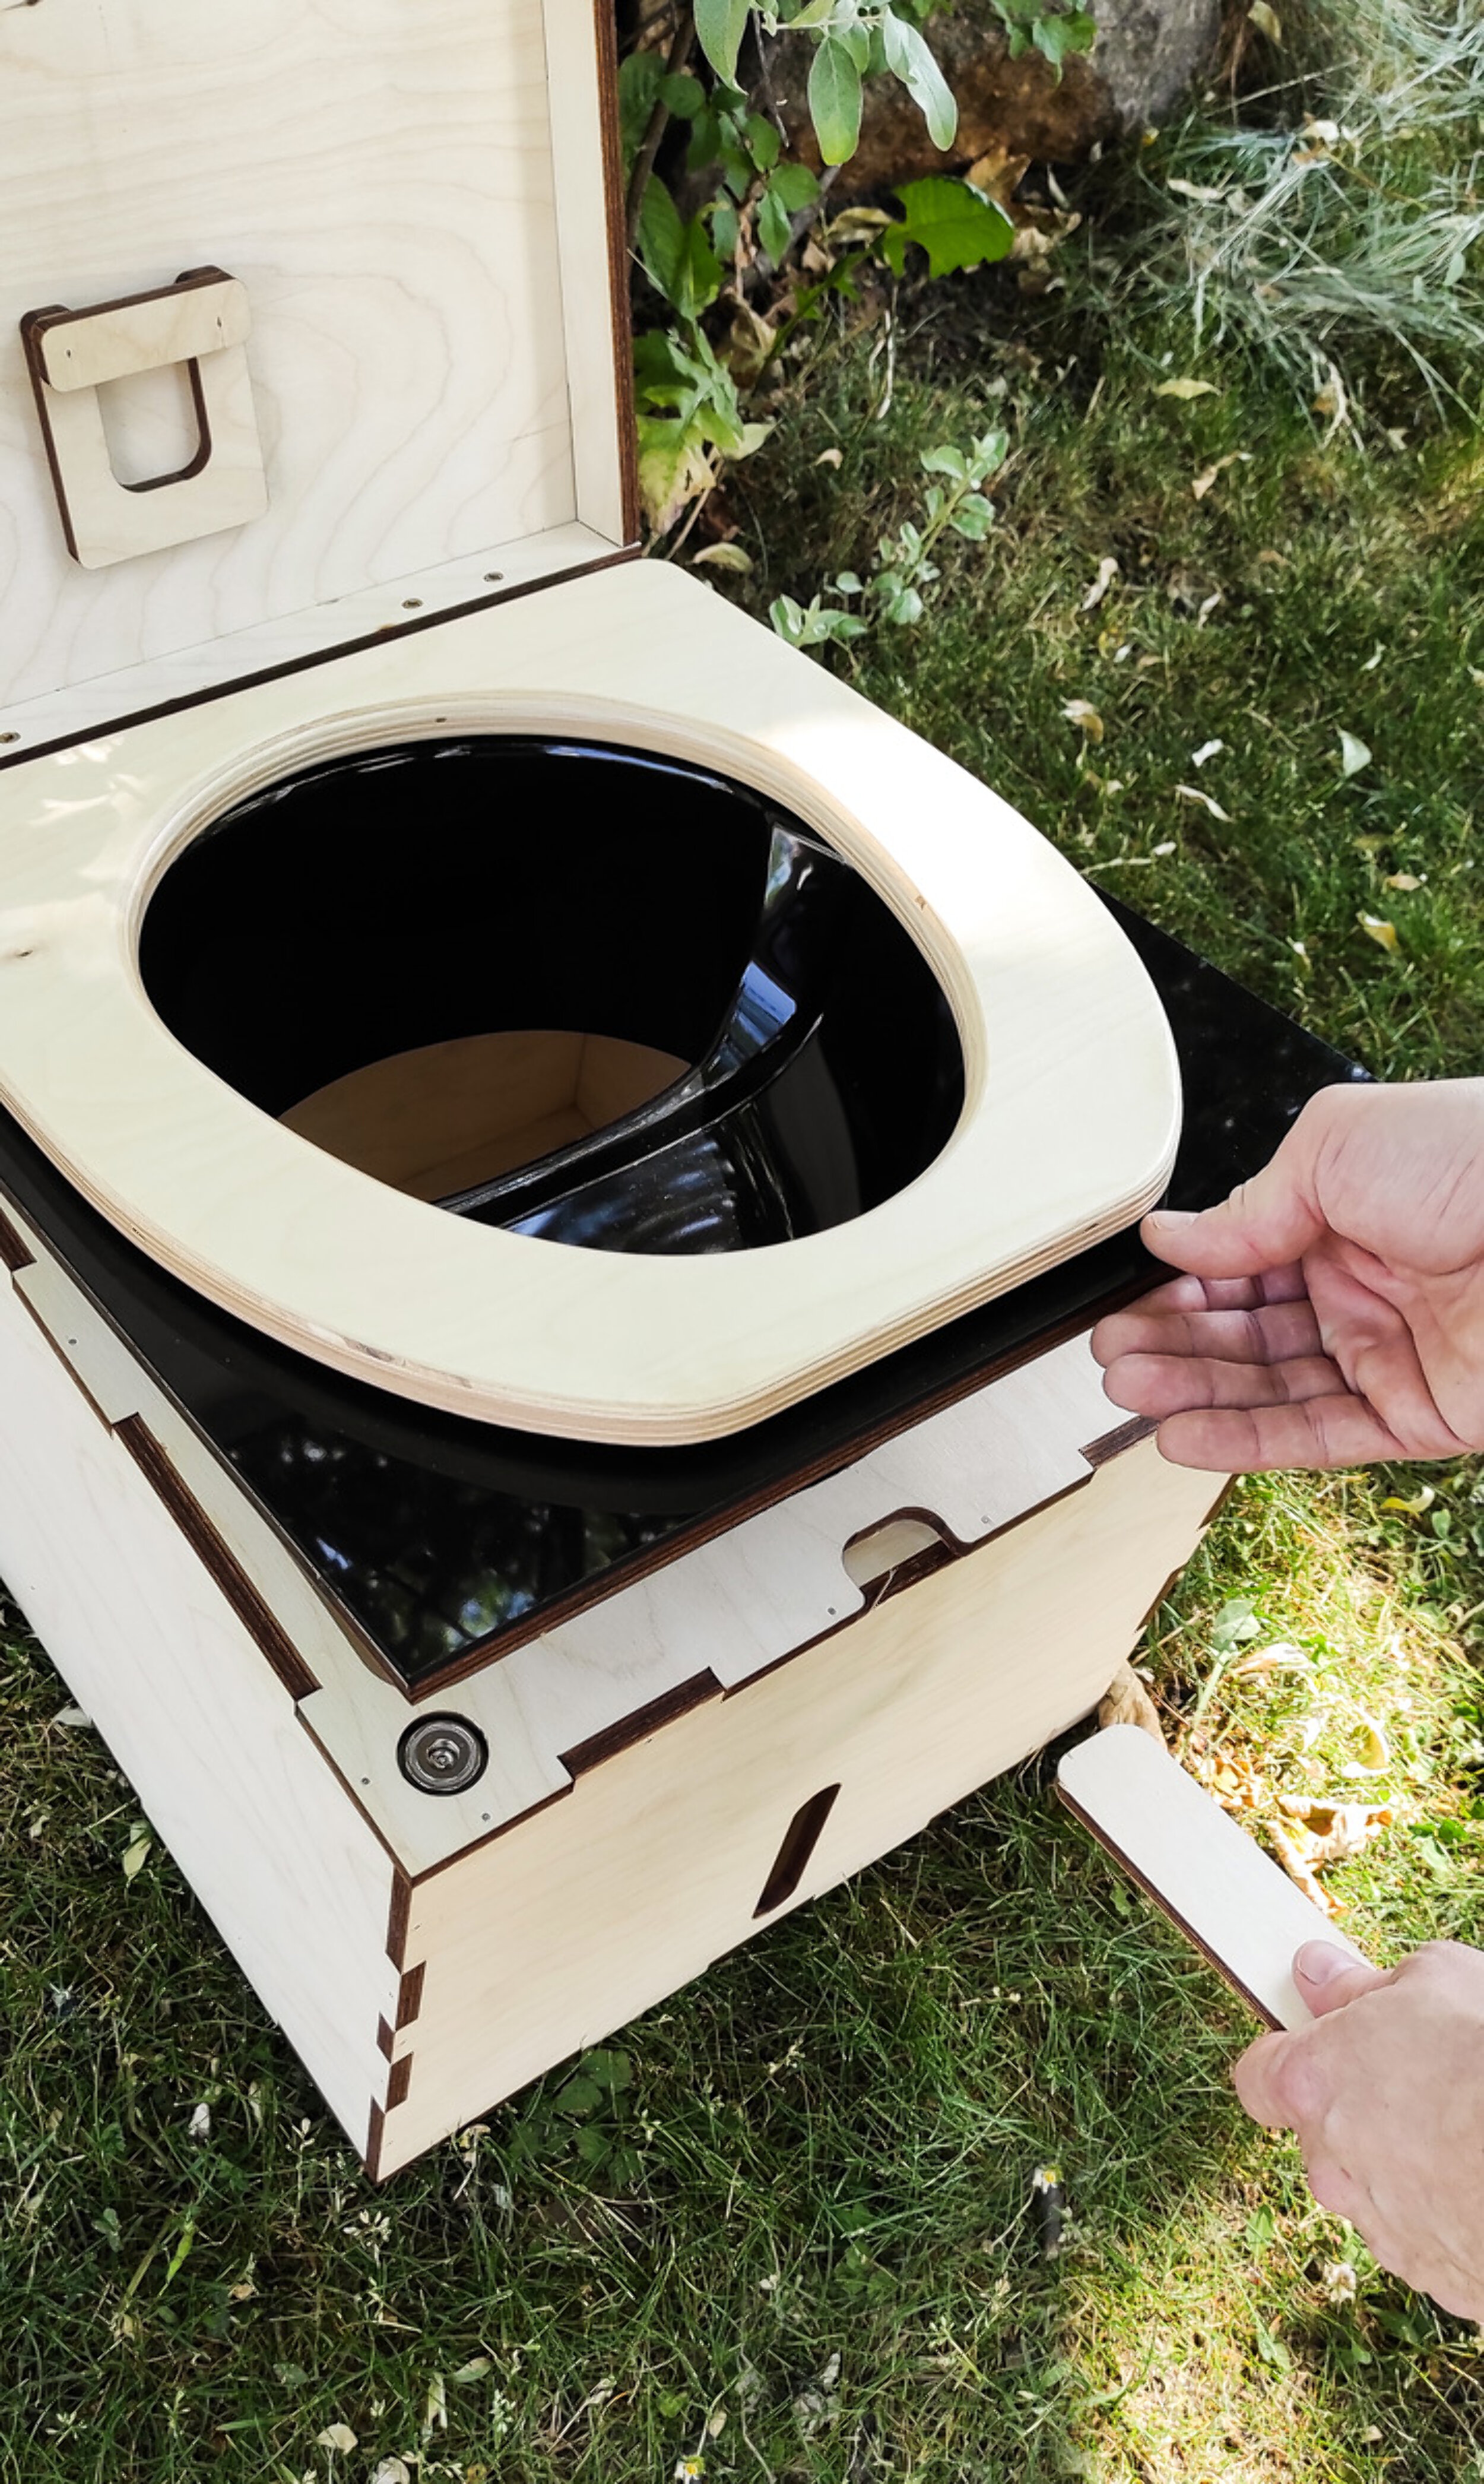 You can remove the solid tank by opening the magnetic urine separator of our PiccoLoo composting toilet